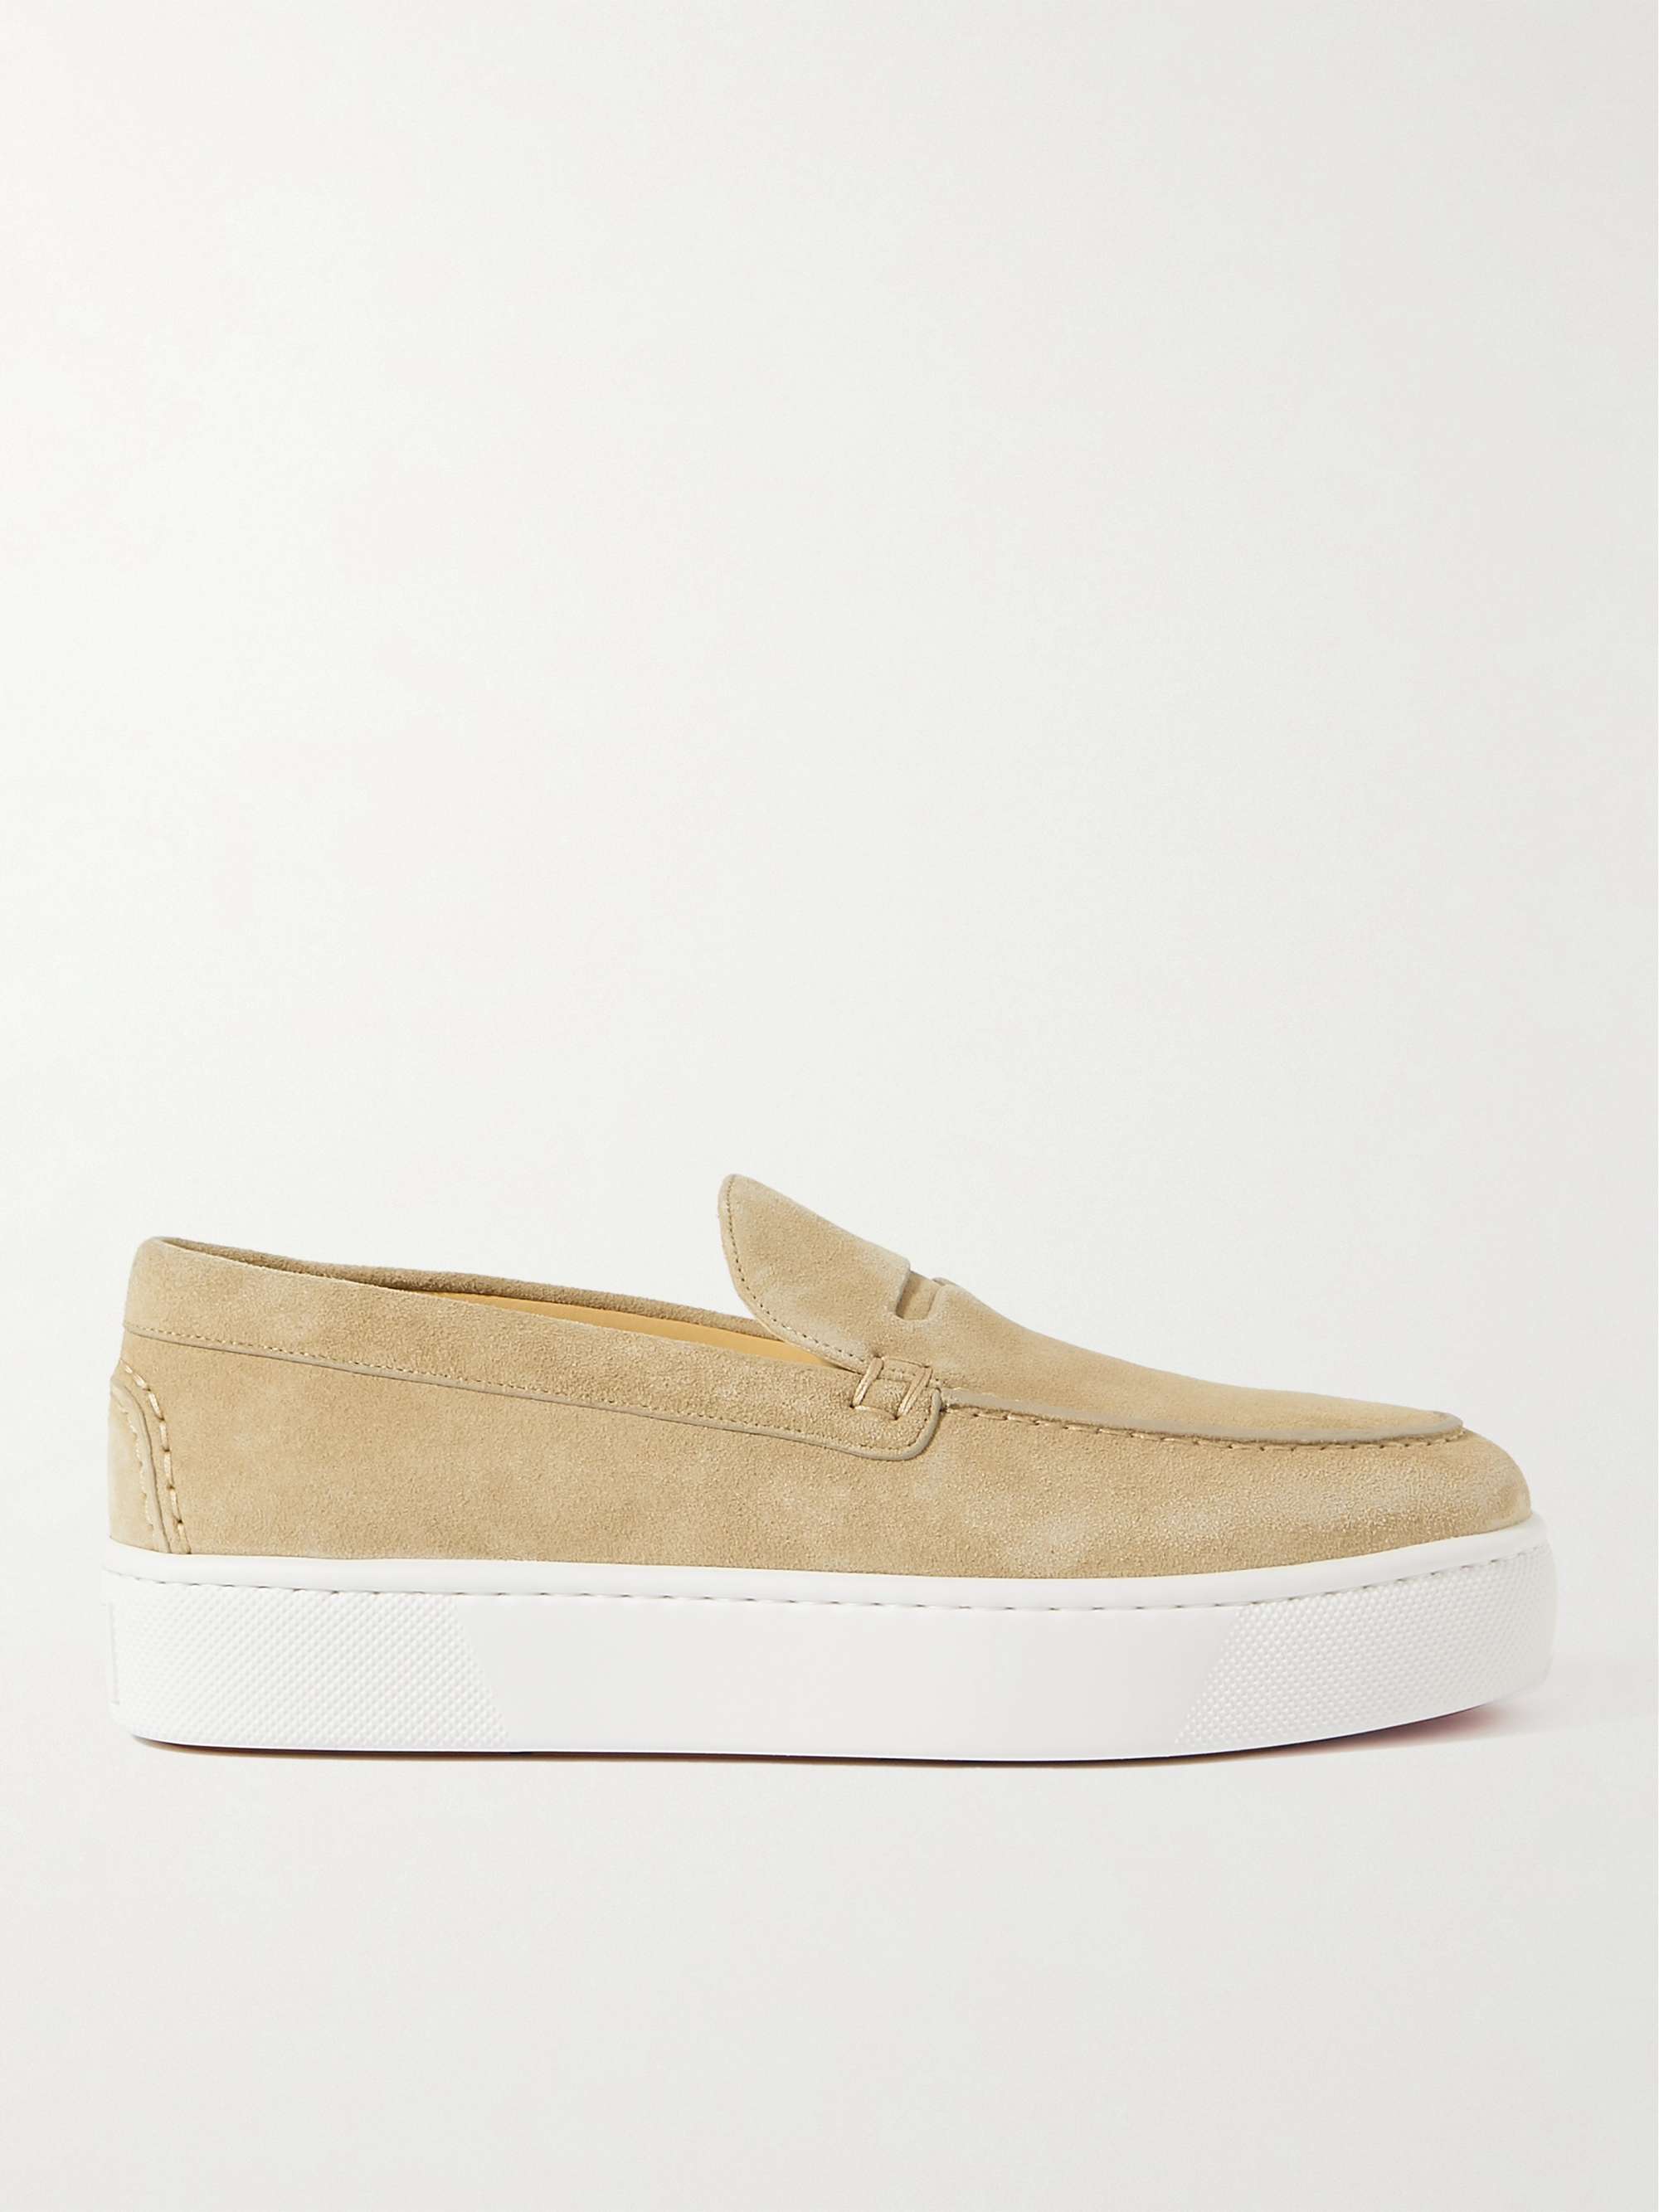 CHRISTIAN LOUBOUTIN Paqueboat Suede Boat Shoes for Men | MR PORTER